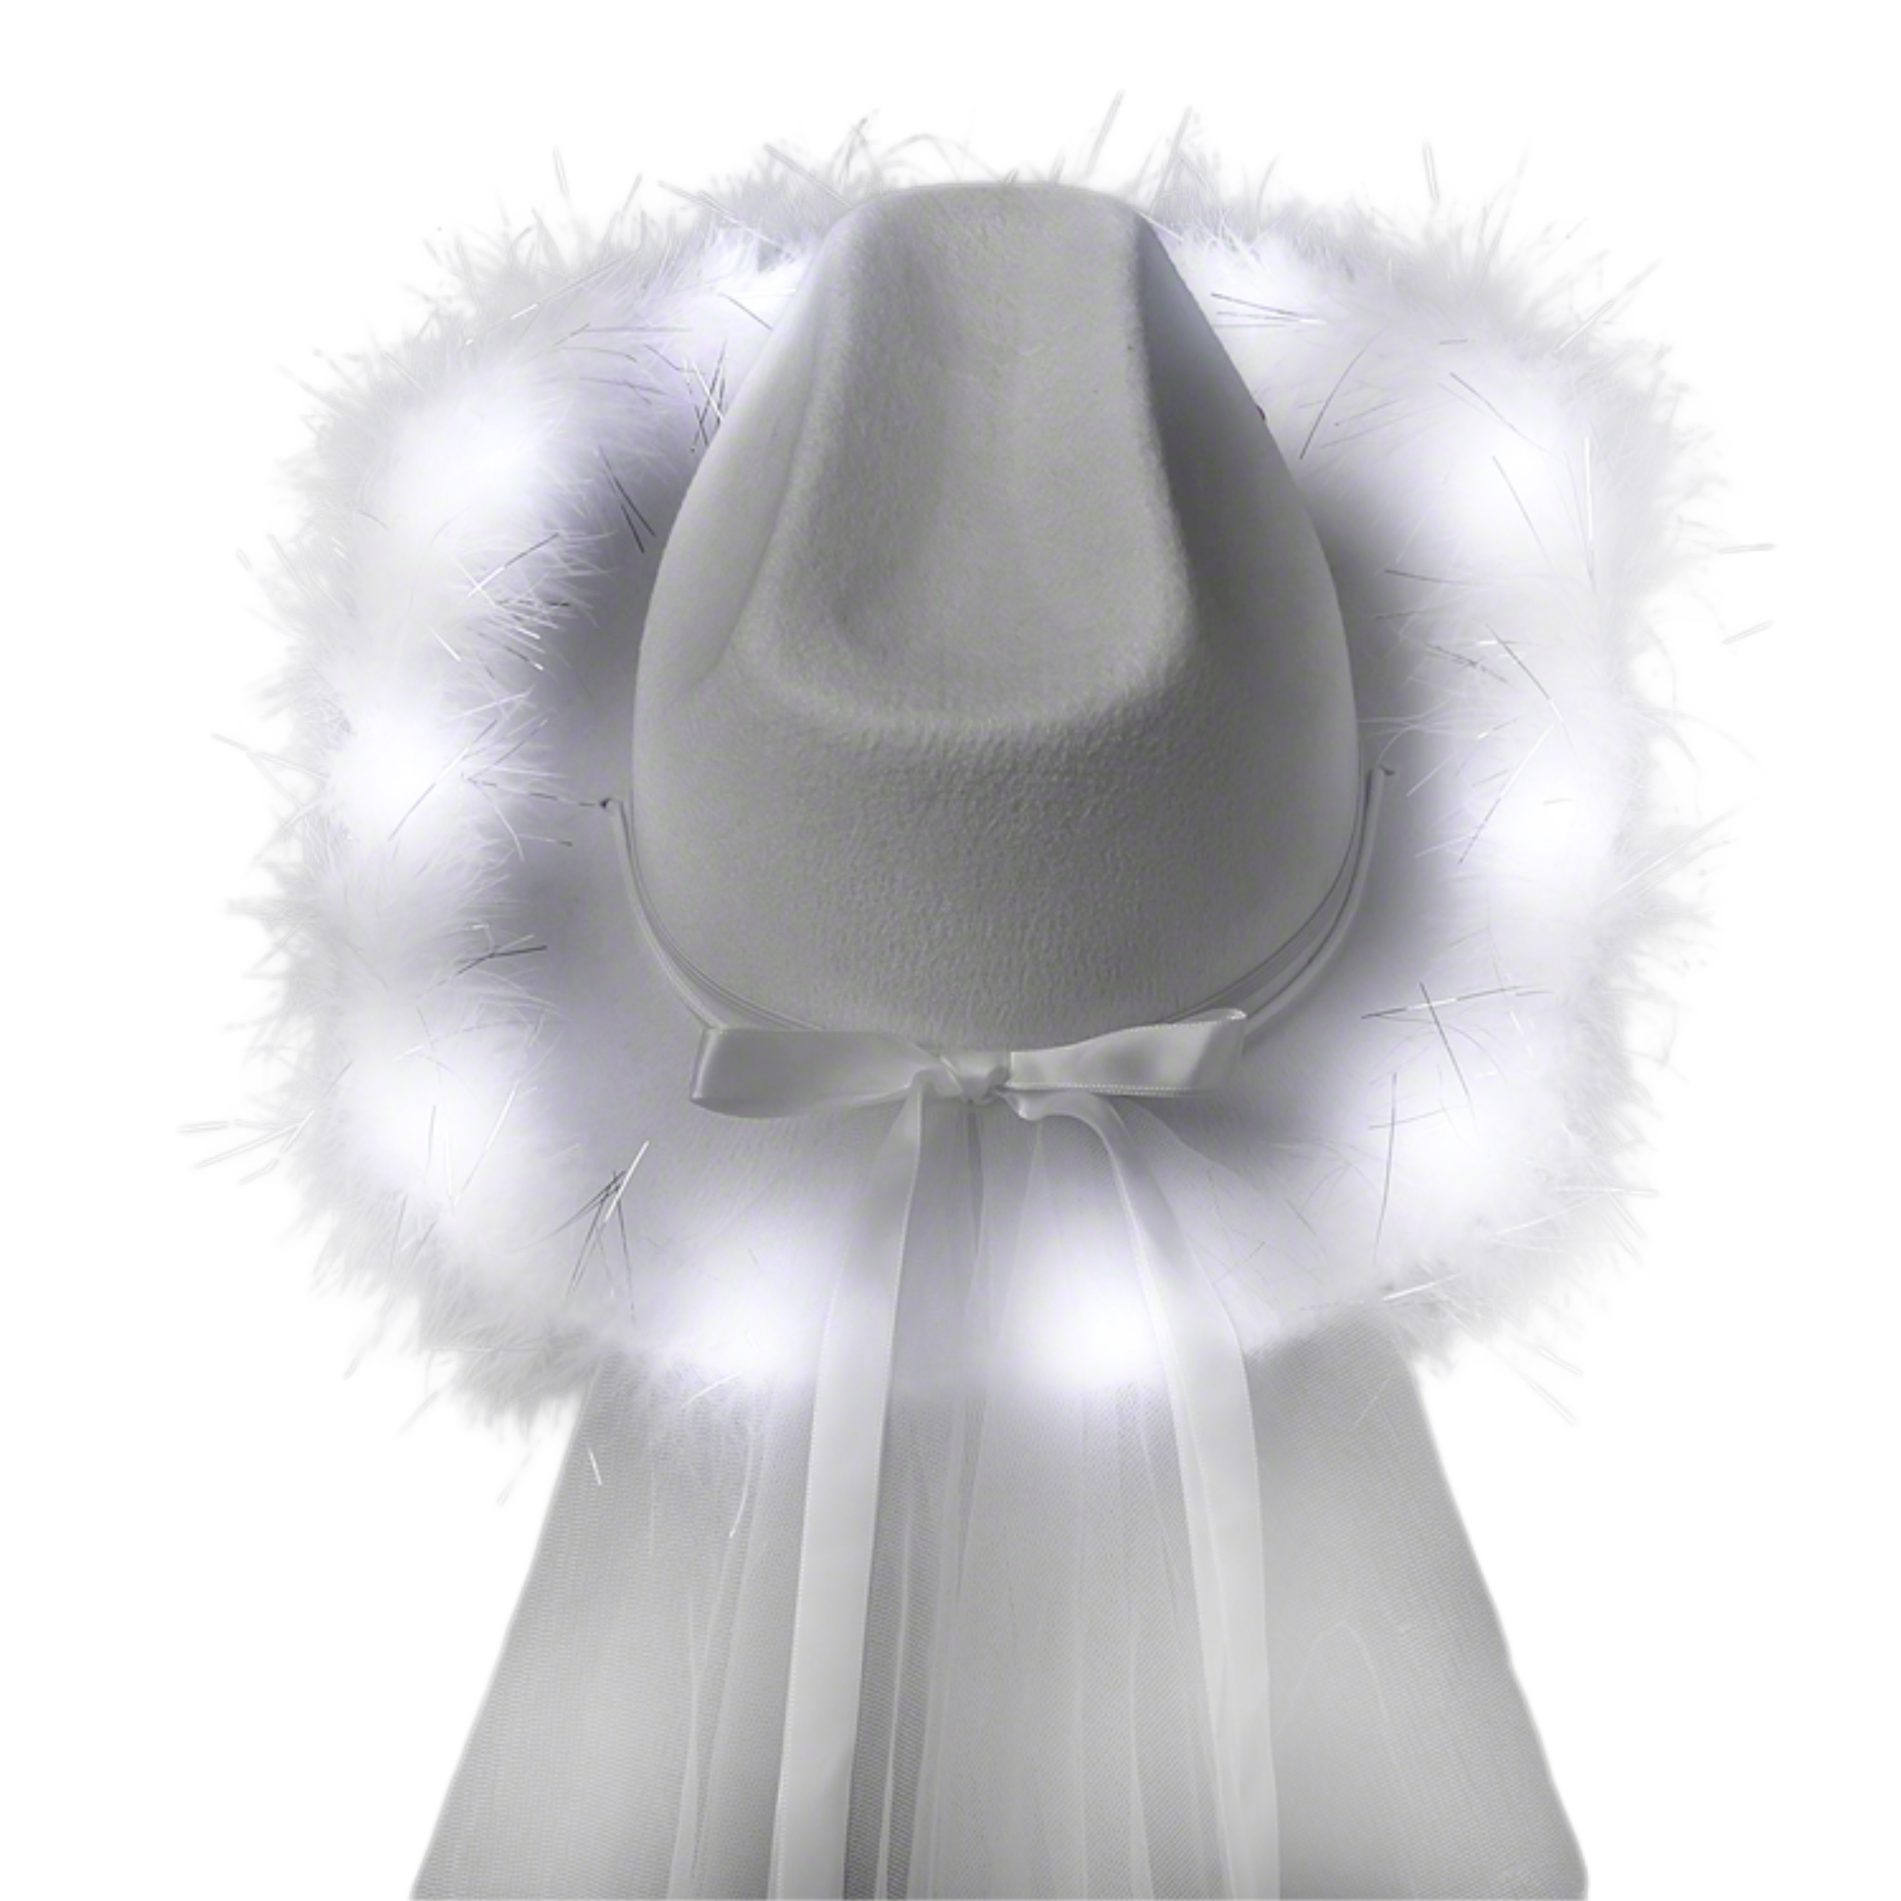 Light Up White Tiara Bridal Cowboy Cowgirl Hat with Veil for Bachelorette and Bridal Party All Products 4